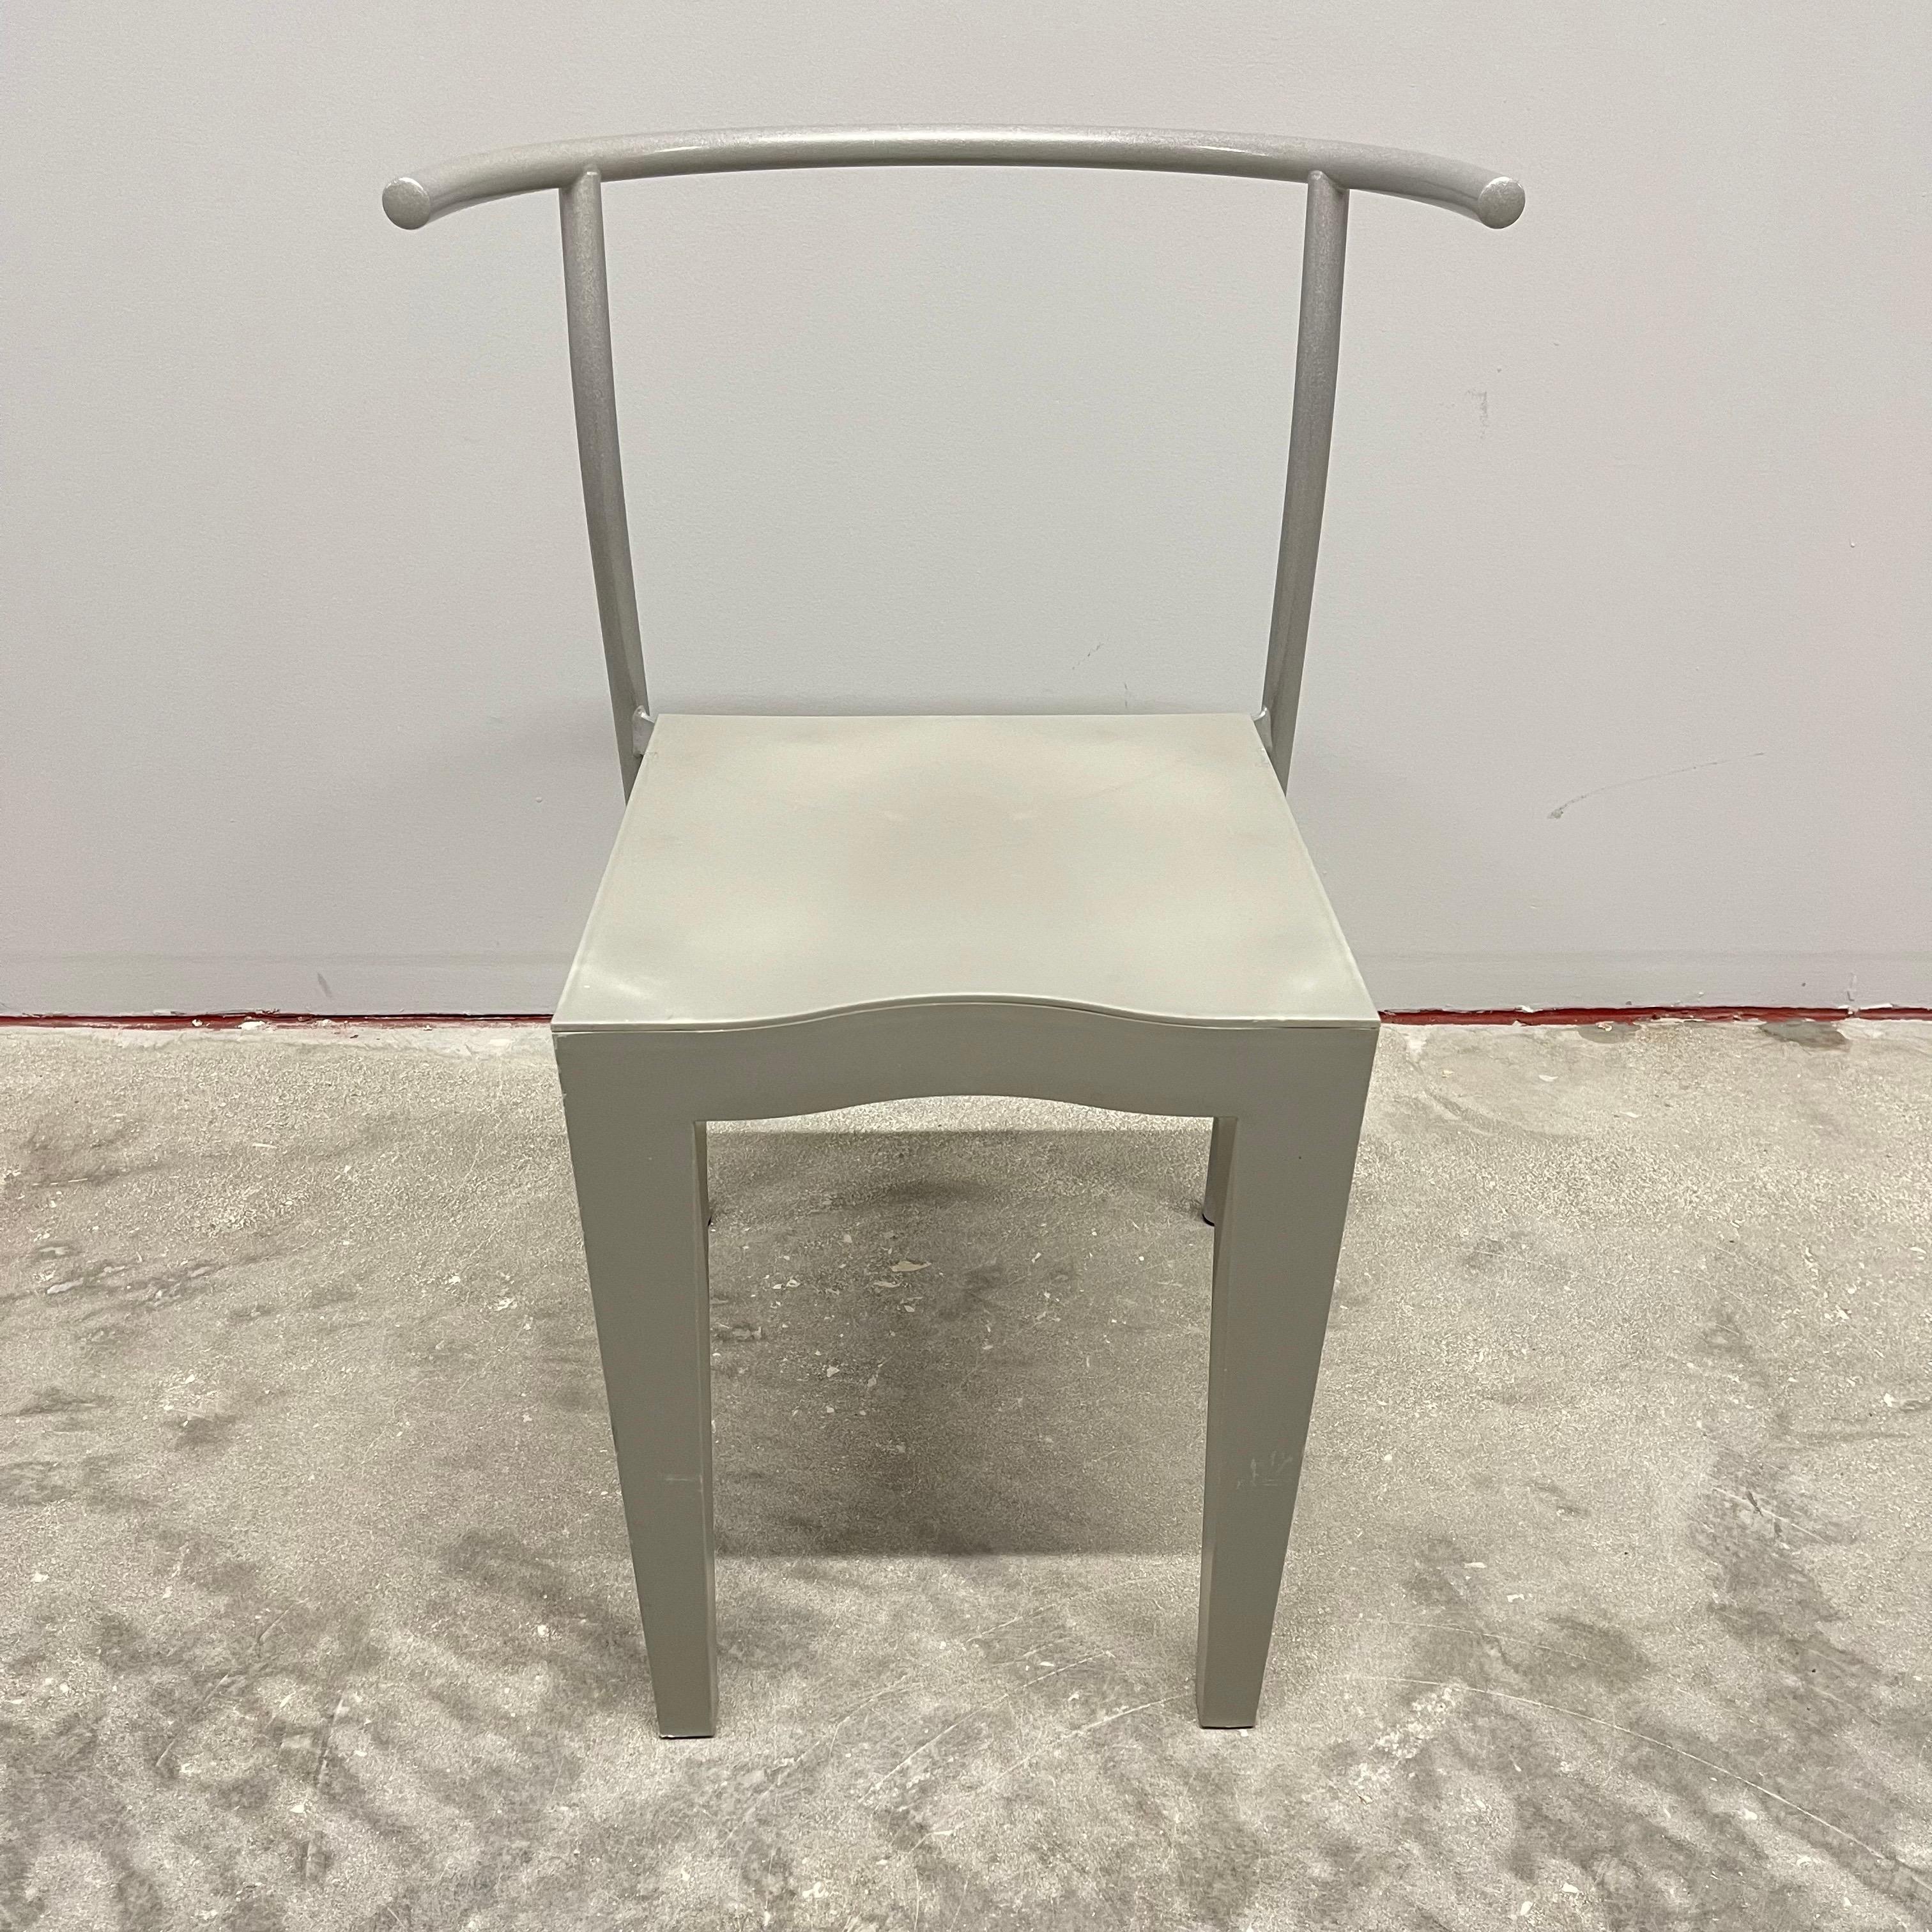 Iconic Dr Glob chair. Post Modern design rendered in rare grey molded propylene with a grey powder coated steel frame back and legs. Designed by Philippe Starck for Kartell, 1990.